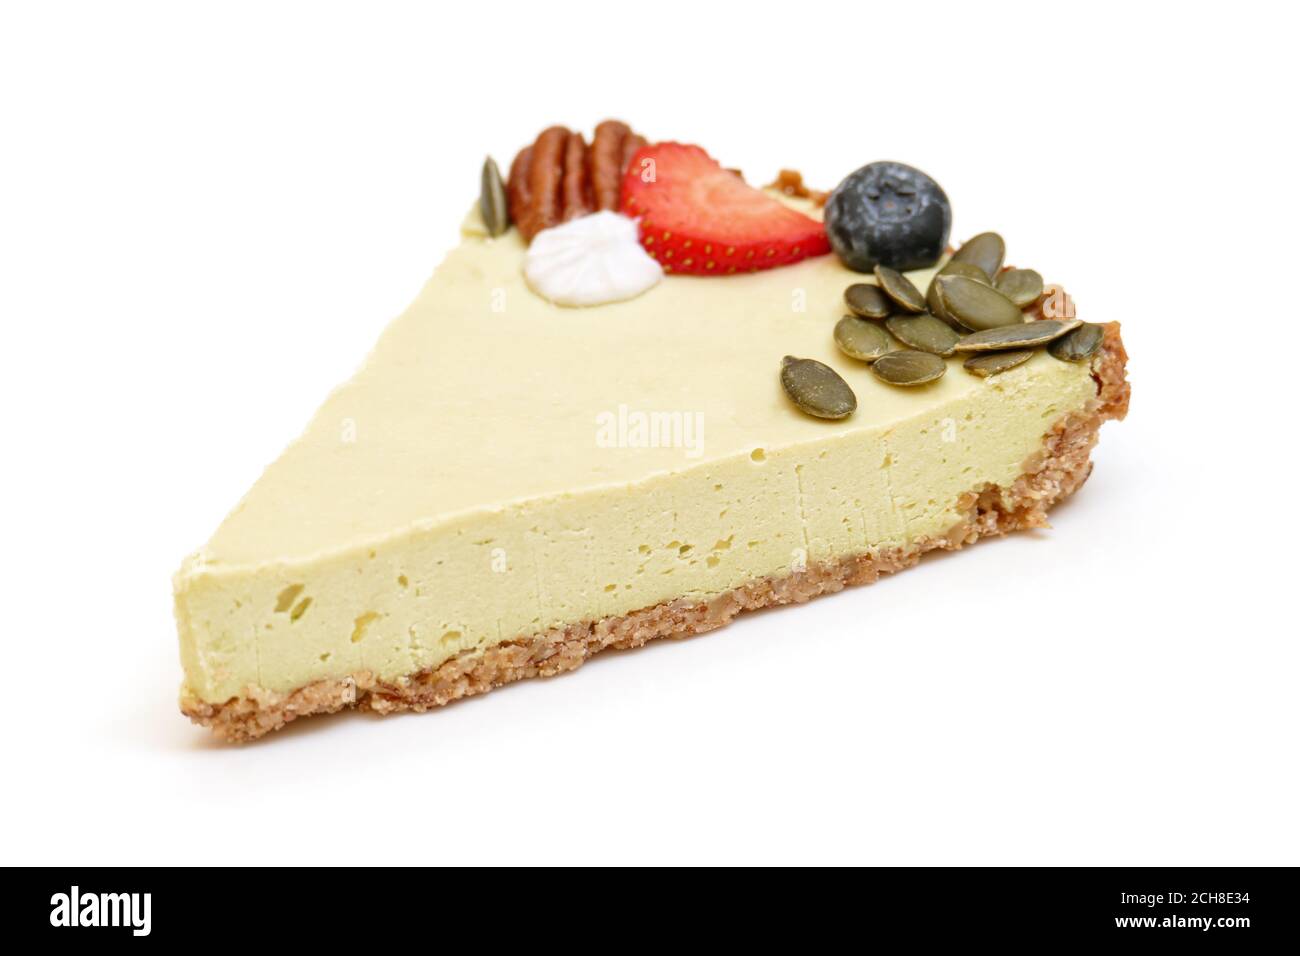 Vegan lemon avocado pie isolated on white background, side view, ingredients listed in keywords Stock Photo